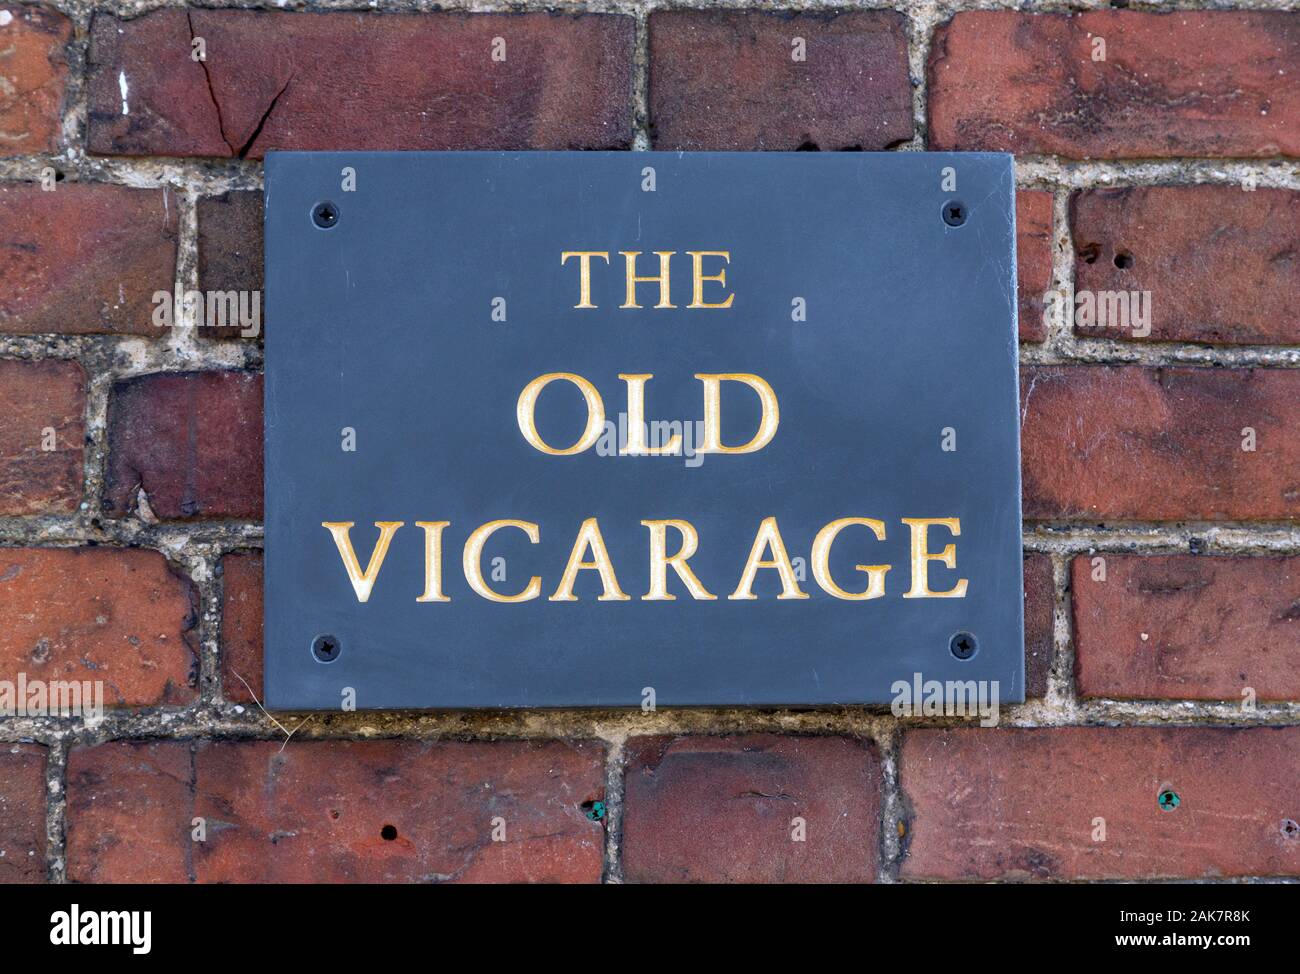 Vicarage sign Stock Photo